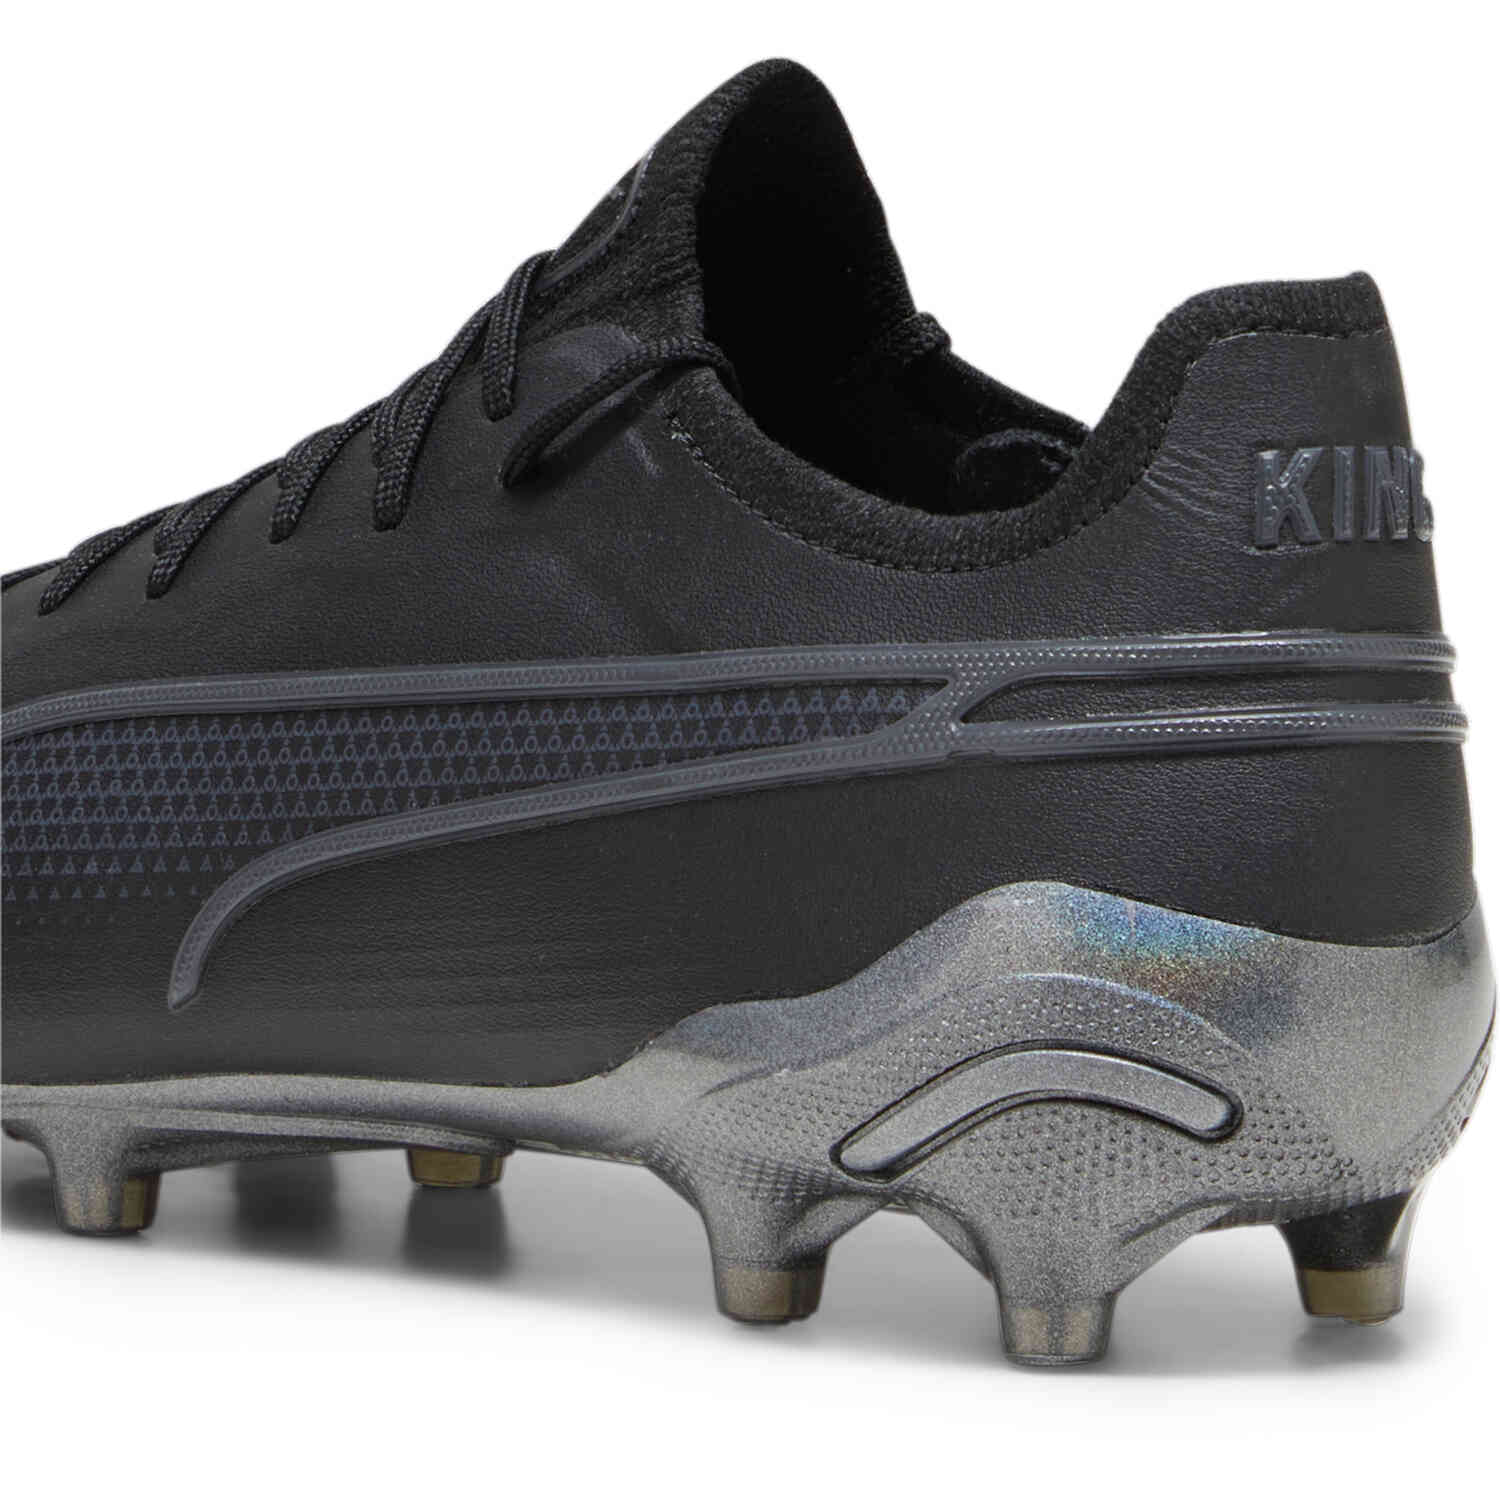 Puma King Ultimate FG – Eclipse Pack